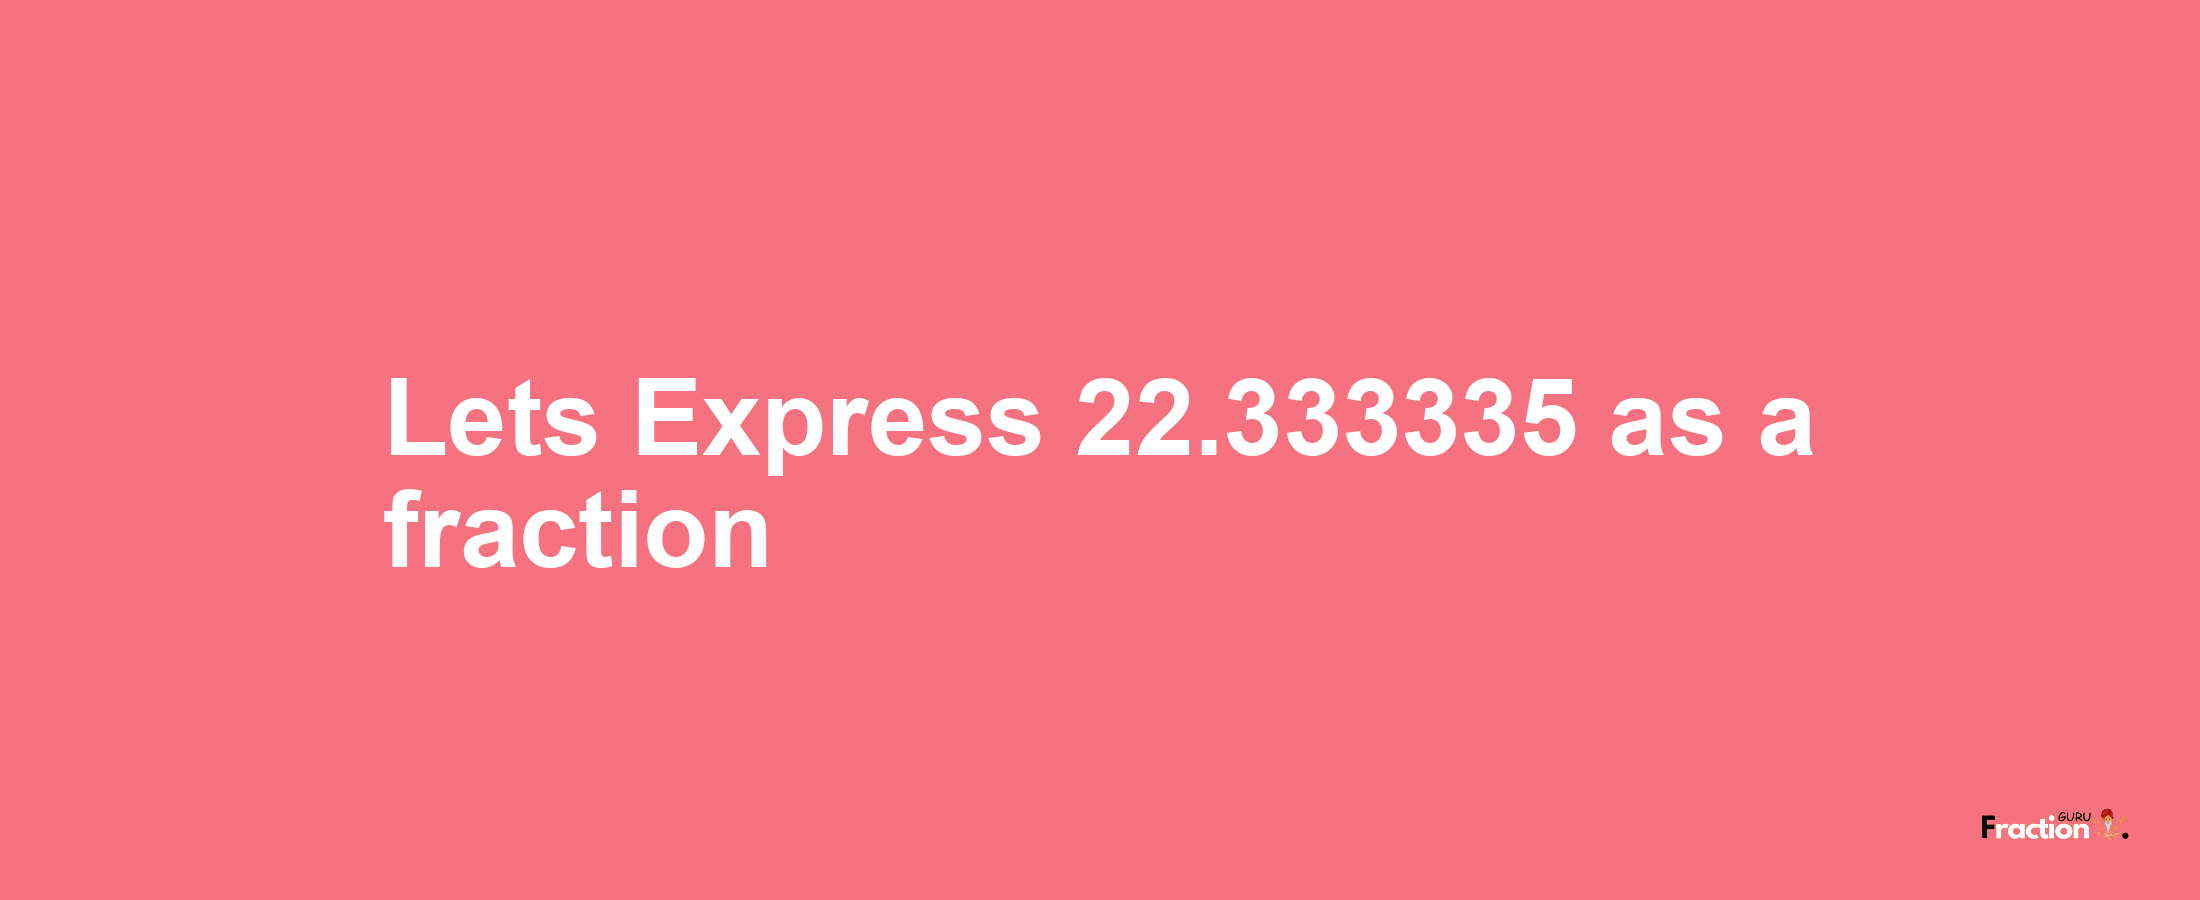 Lets Express 22.333335 as afraction